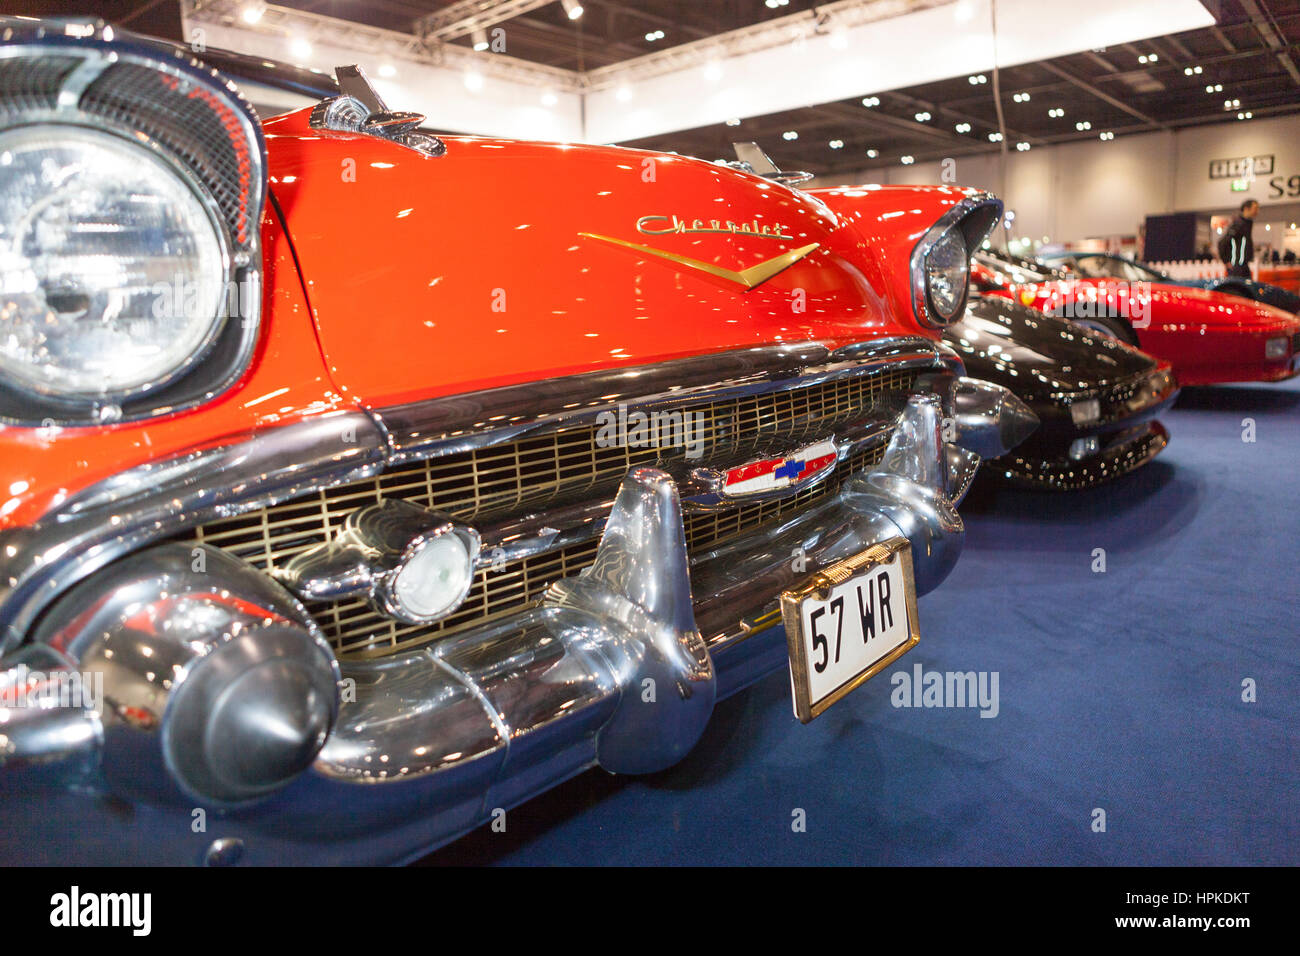 London, UK. 23rd Feb, 2017. Five times winners Derek Bell and Emanuele Pirro open the 2017 London Classic Car Show. 23rd February, 2017 Credit: Steve Parkins/Alamy Live News Stock Photo